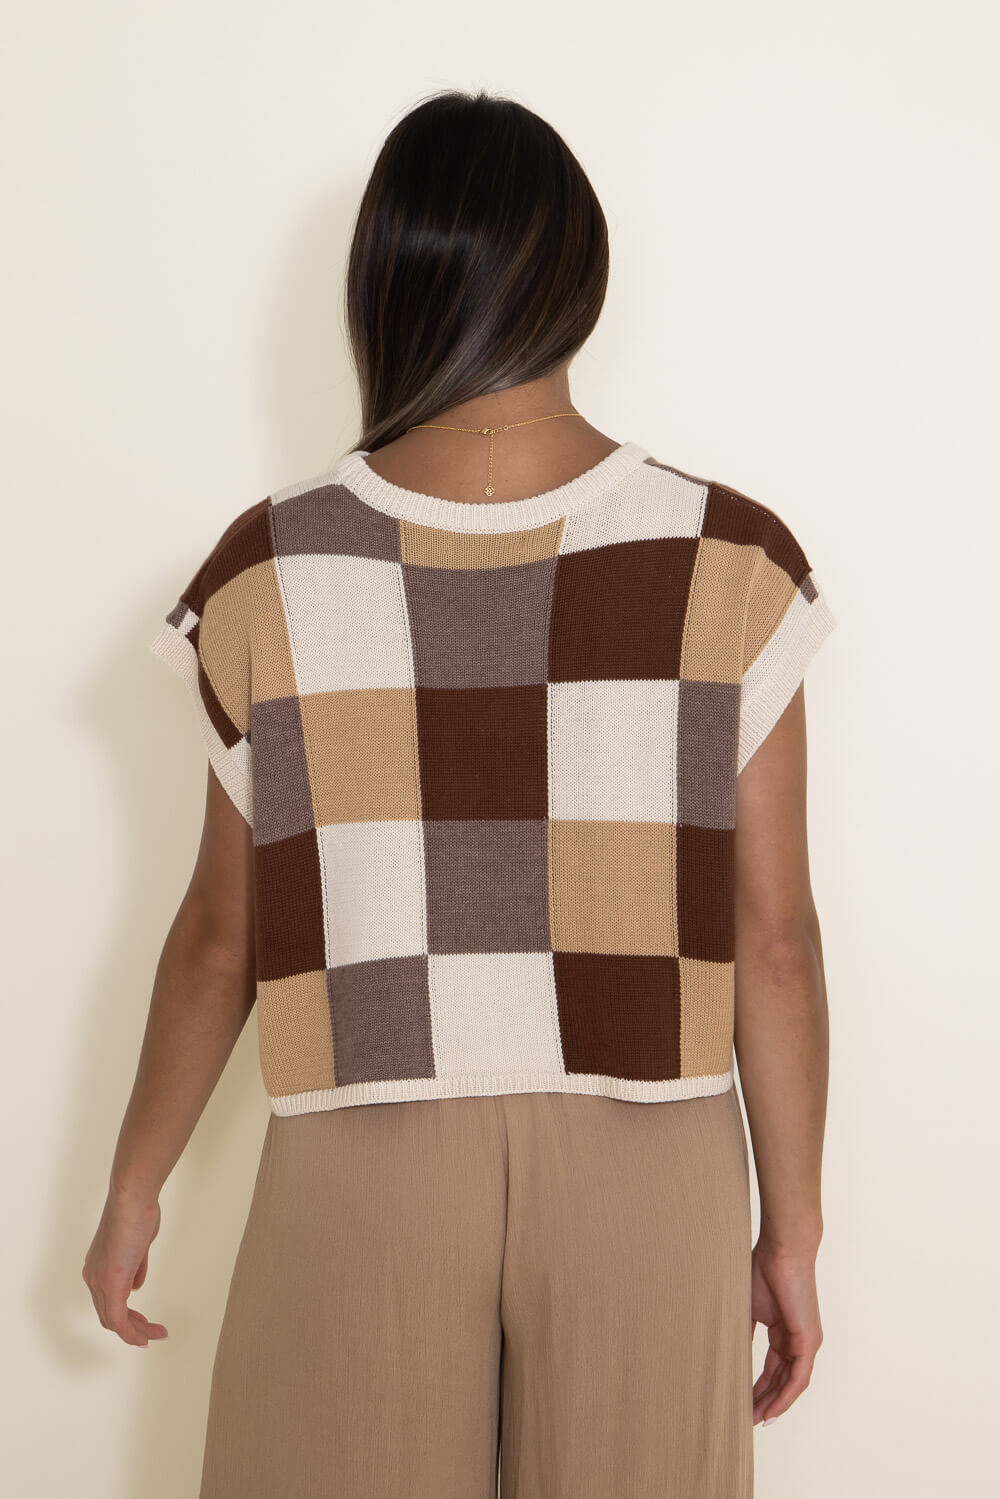 Brown Corded 2pcs Colorblock Pullover and Pants Outfit – KesleyBoutique